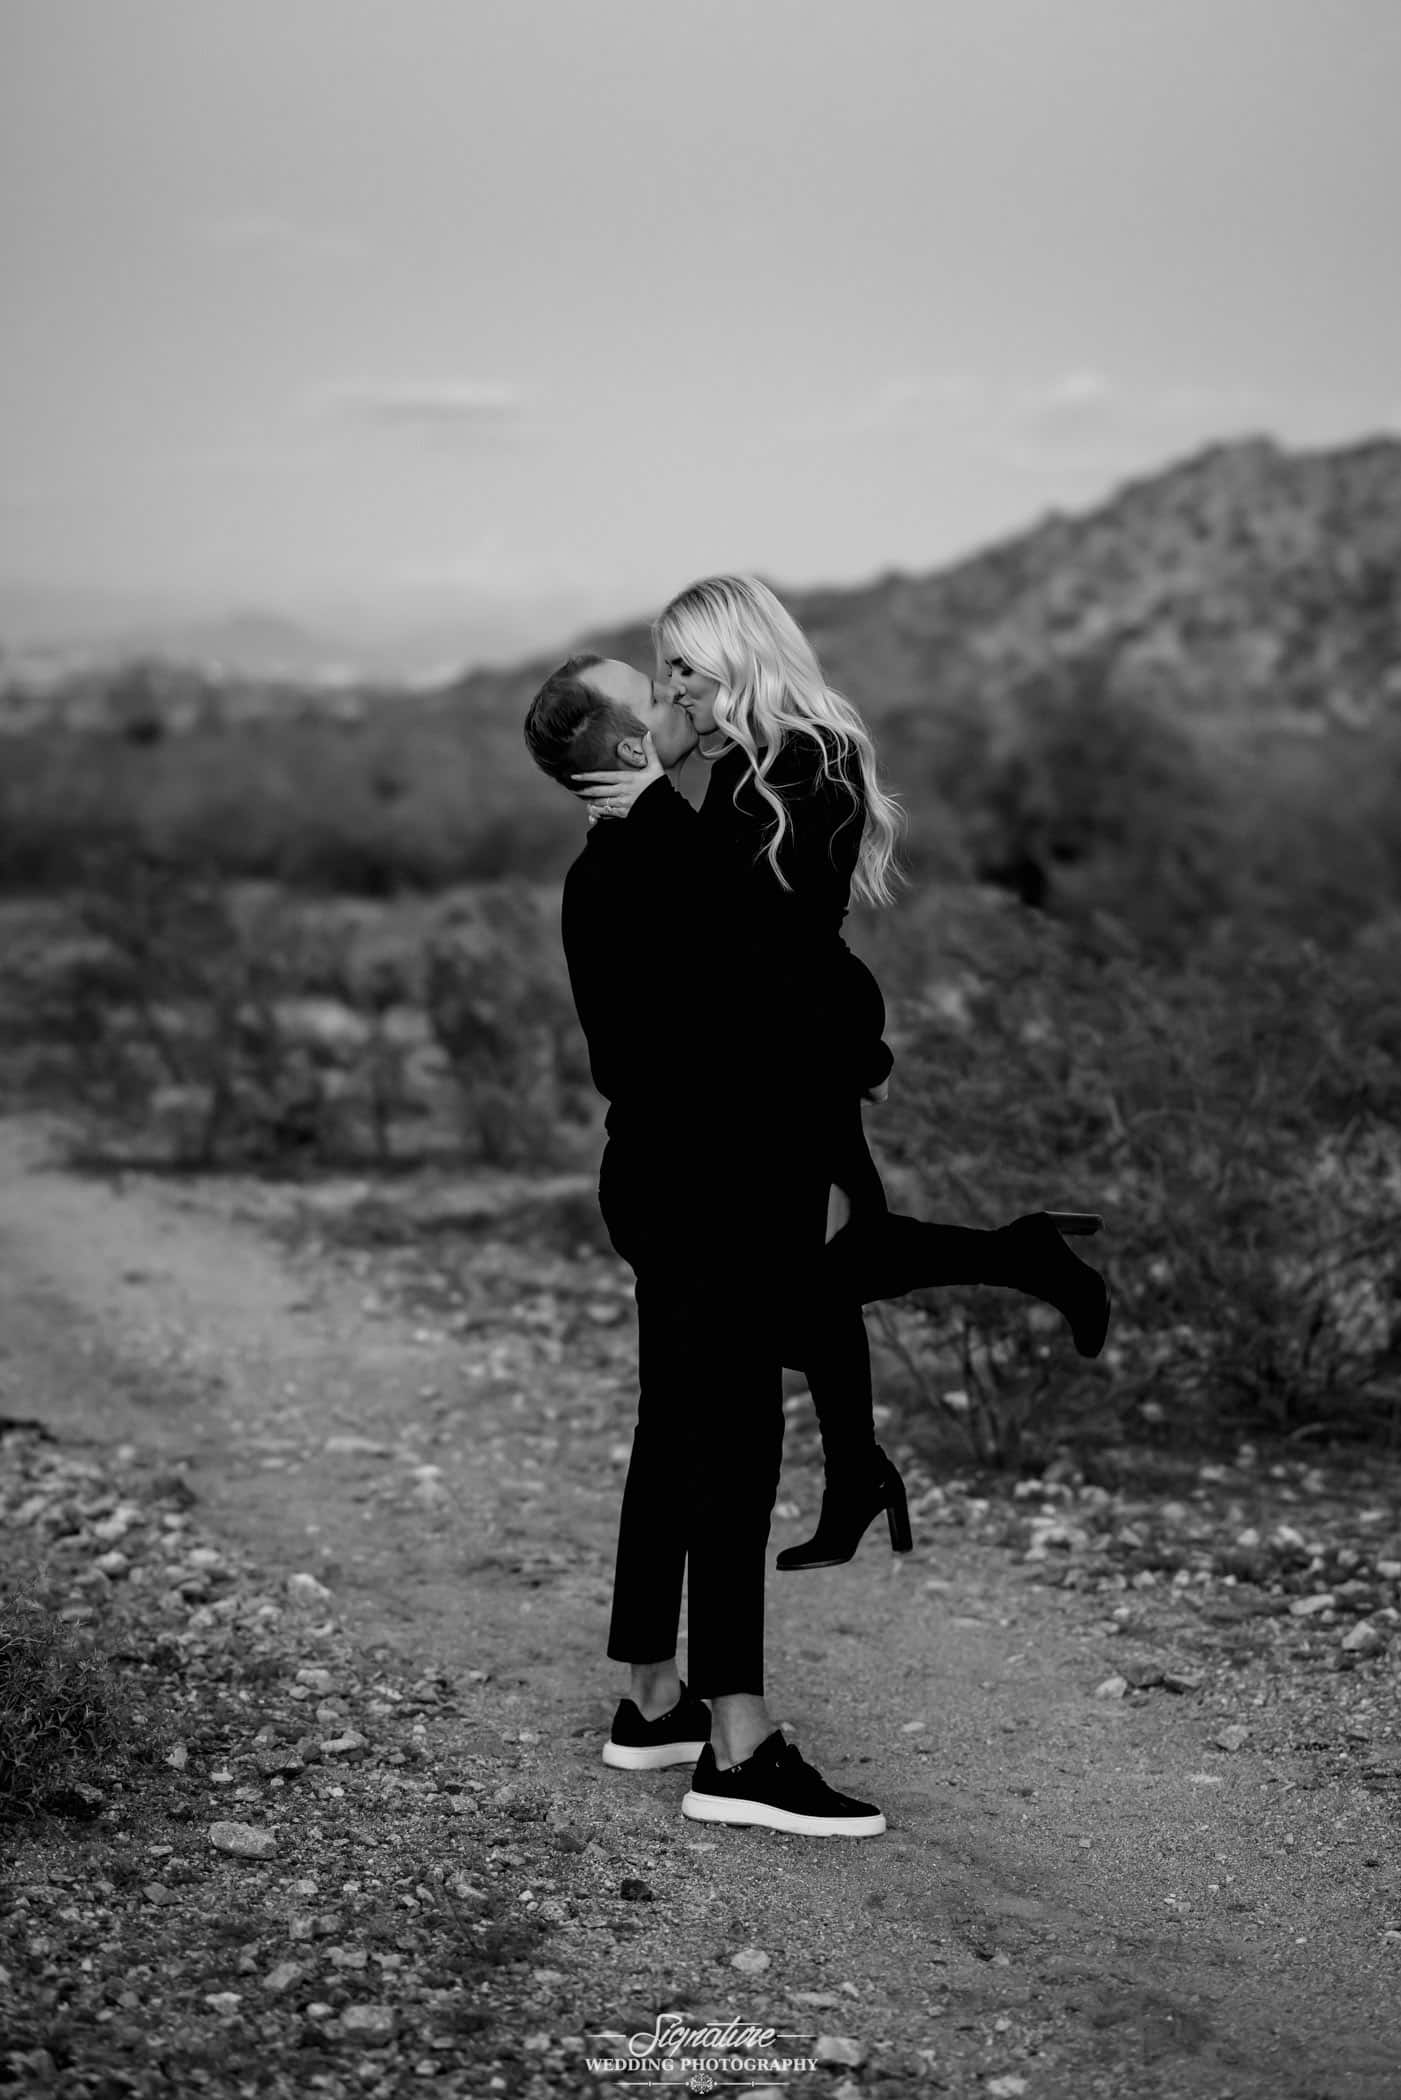 Man picking up woman black and white engagement photo